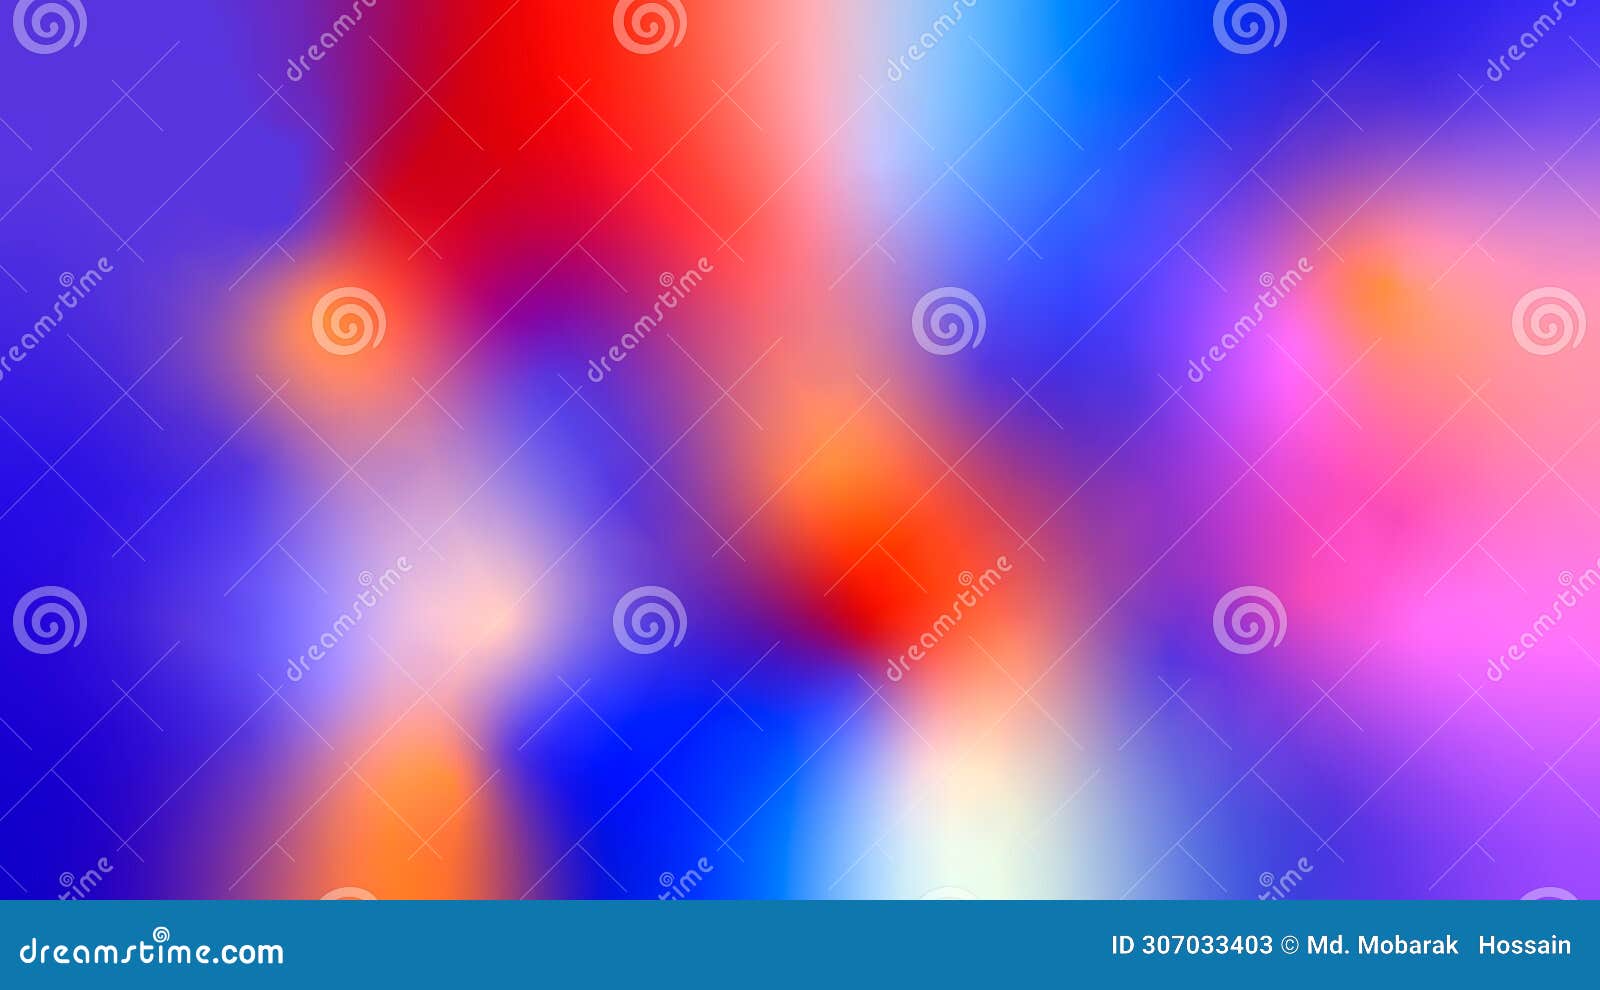 versatile gradient background - red, blue, purple, and white - .